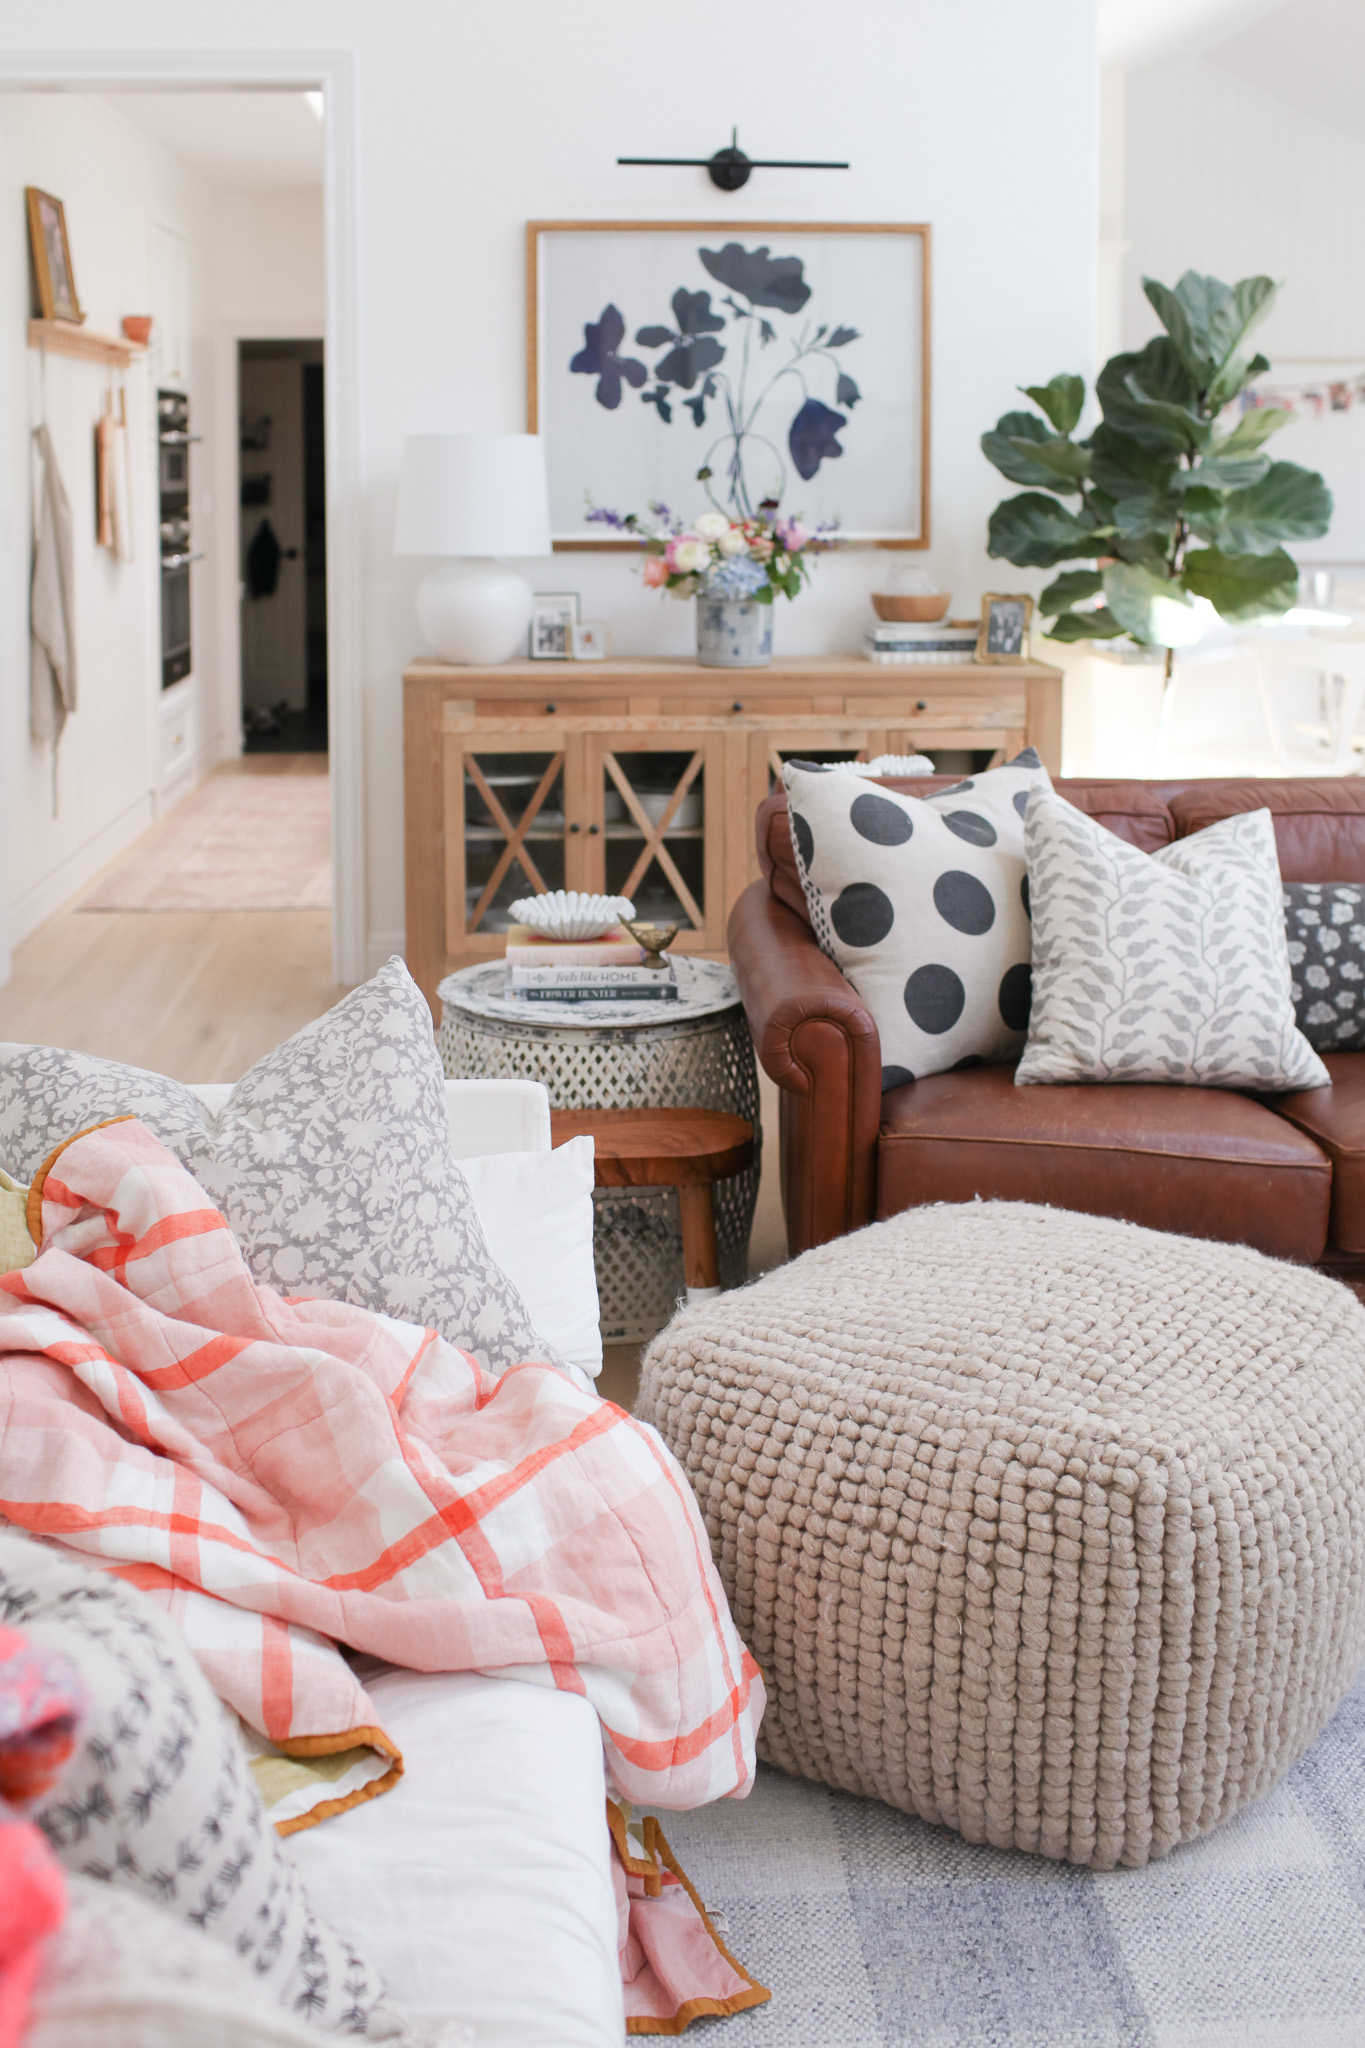 living room with black and white floral art, 2 sofas and a pouf. Pink plaid quilt.